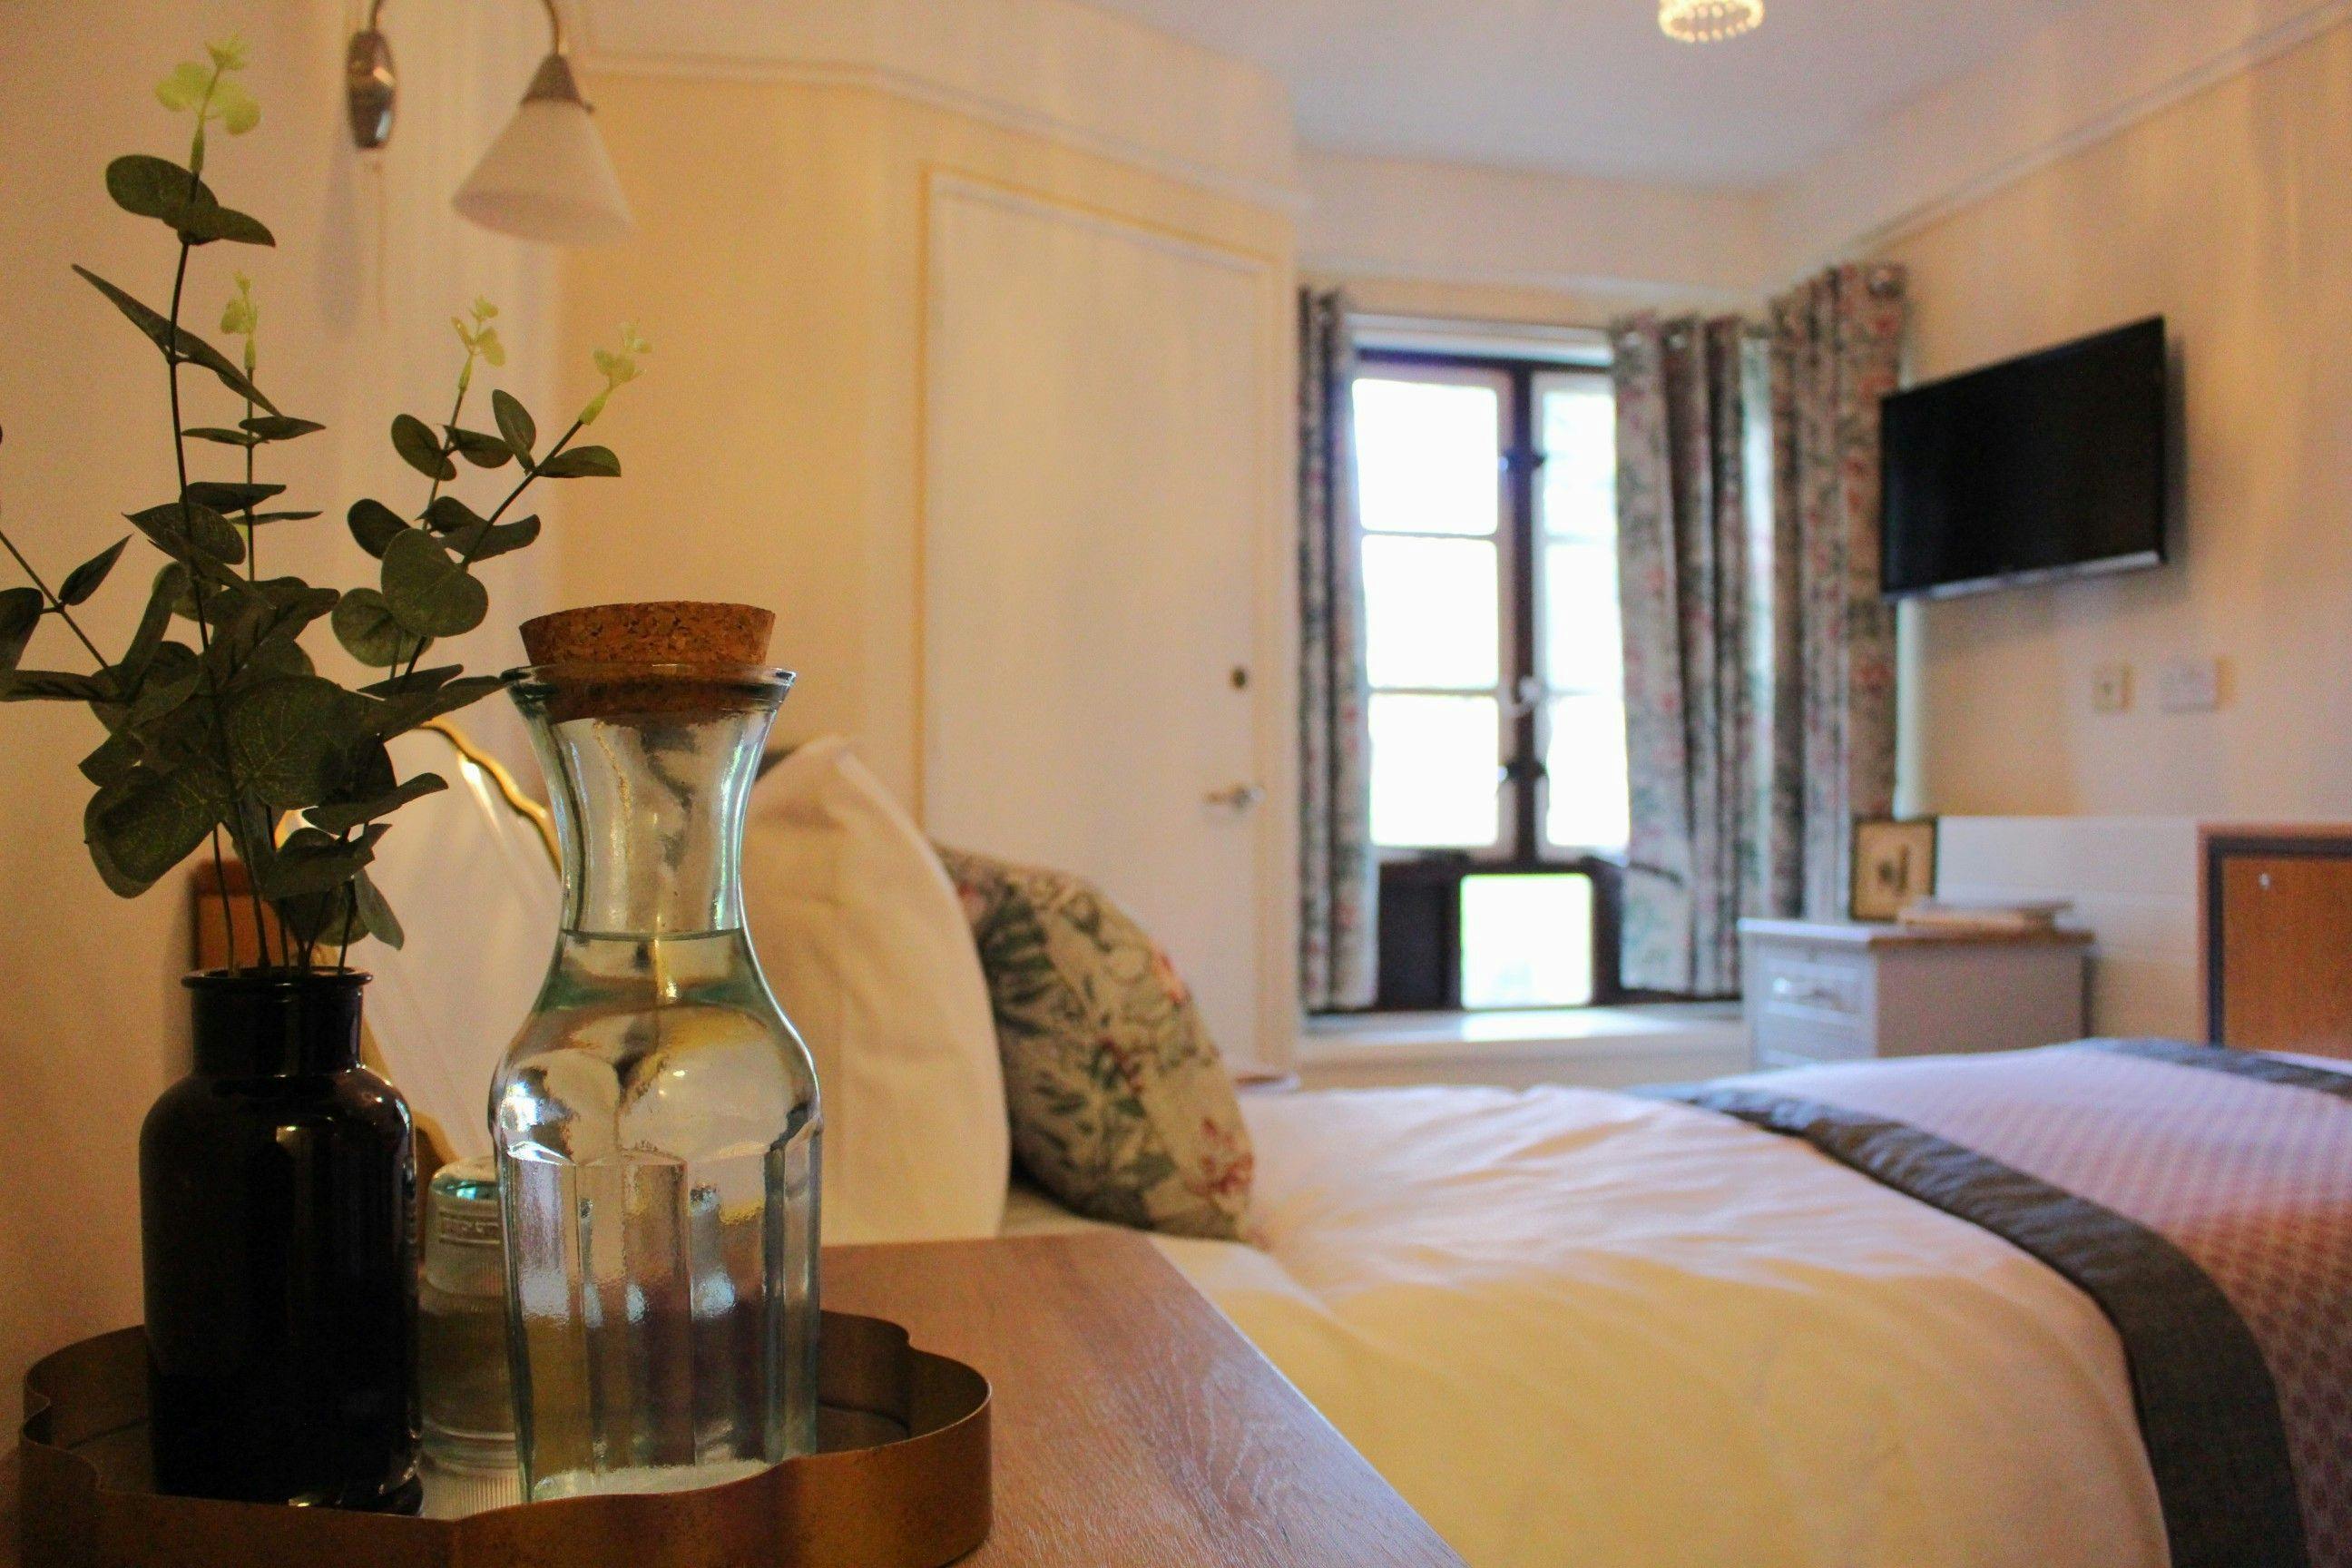 Bedroom at Beechlands Care Home in Loughton, Essex